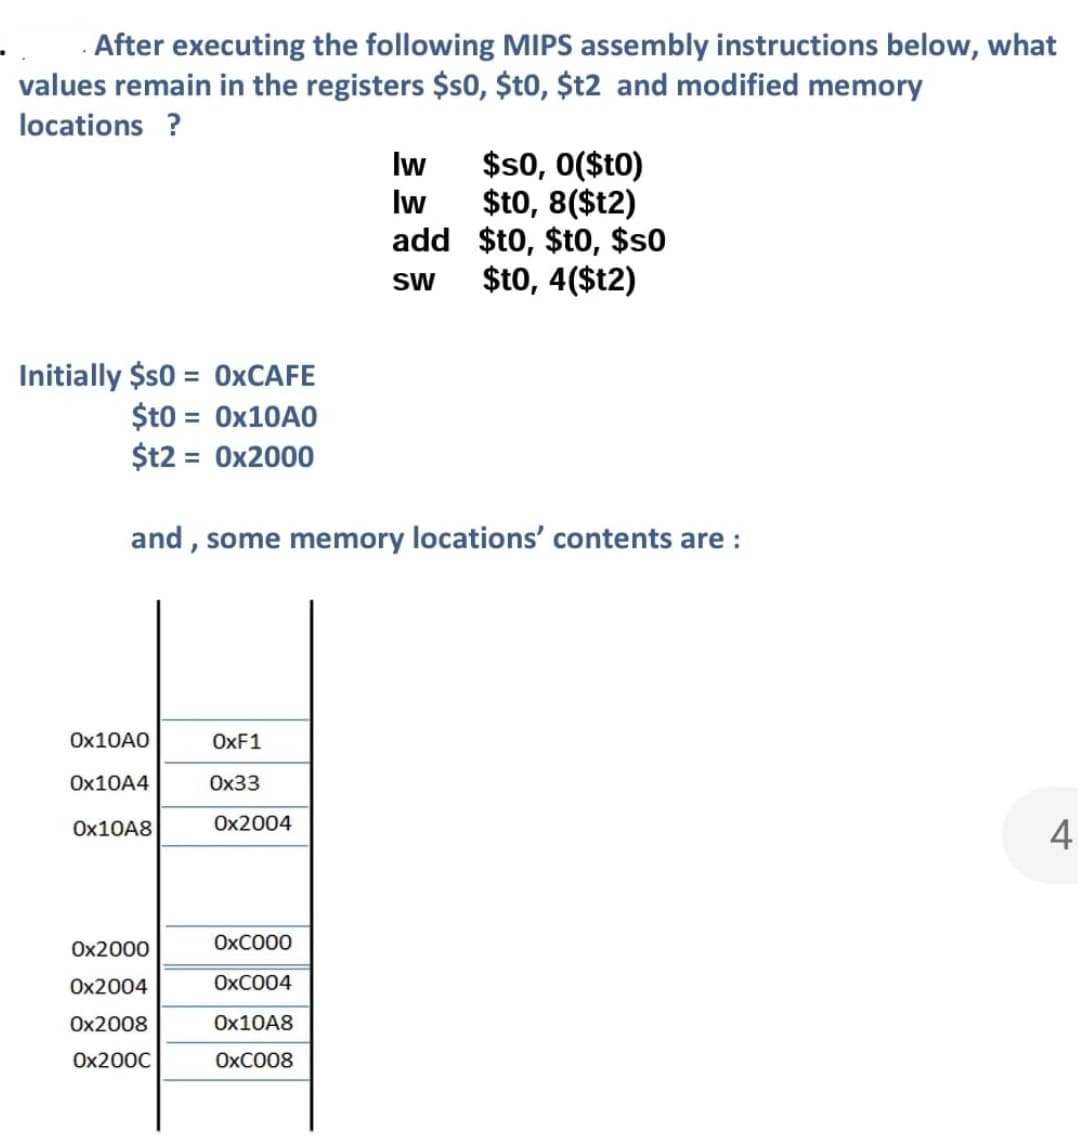 After executing the following MIPS assembly instructions below, what
values remain in the registers $s0, $t0, $t2 and modified memory
locations ?
Initially $s0 = 0xCAFE
$t0 = 0x10A0
$t2 = 0x2000
Ox10A0
0x10A4
and, some memory locations' contents are:
0x10A8
0x2000
0x2004
0x2008
0x200C
OxF1
0x33
0x2004
Iw
Iw
add
SW
OXC000
OxC004
0x10A8
OxC008
$s0, 0($t0)
$t0, 8($t2)
$t0,$t0, $s0
$t0, 4($t2)
4